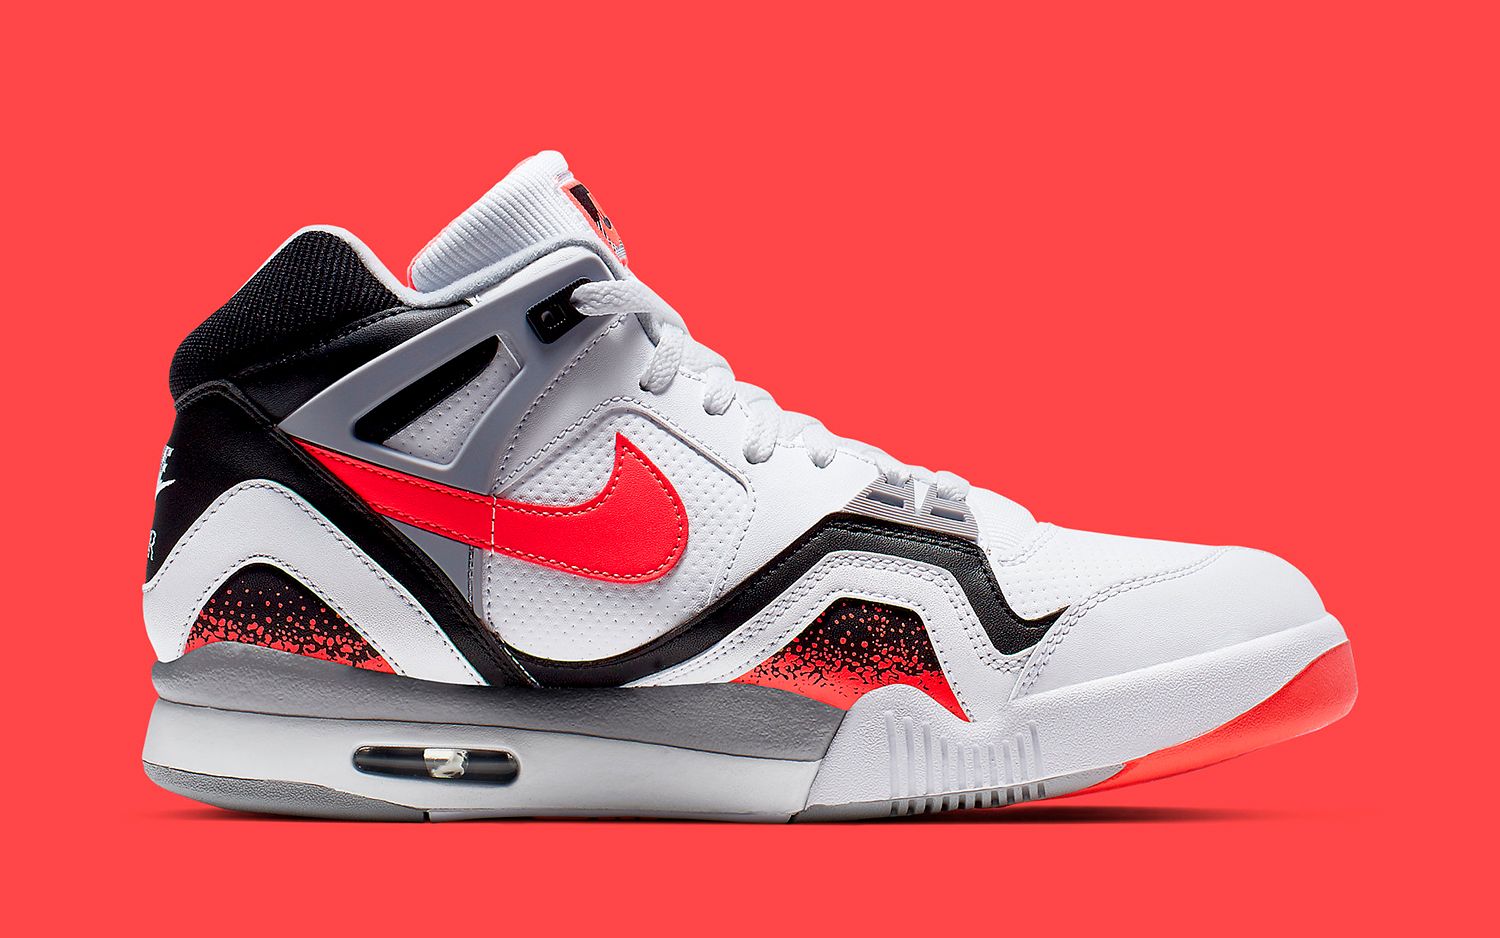 Merchandising Diverse vleet Andre Agassi's OG Nike Air Tech Challenge II Will Join LeBron's Two-Piece “Hot  Lava” Pack | House of Heat°